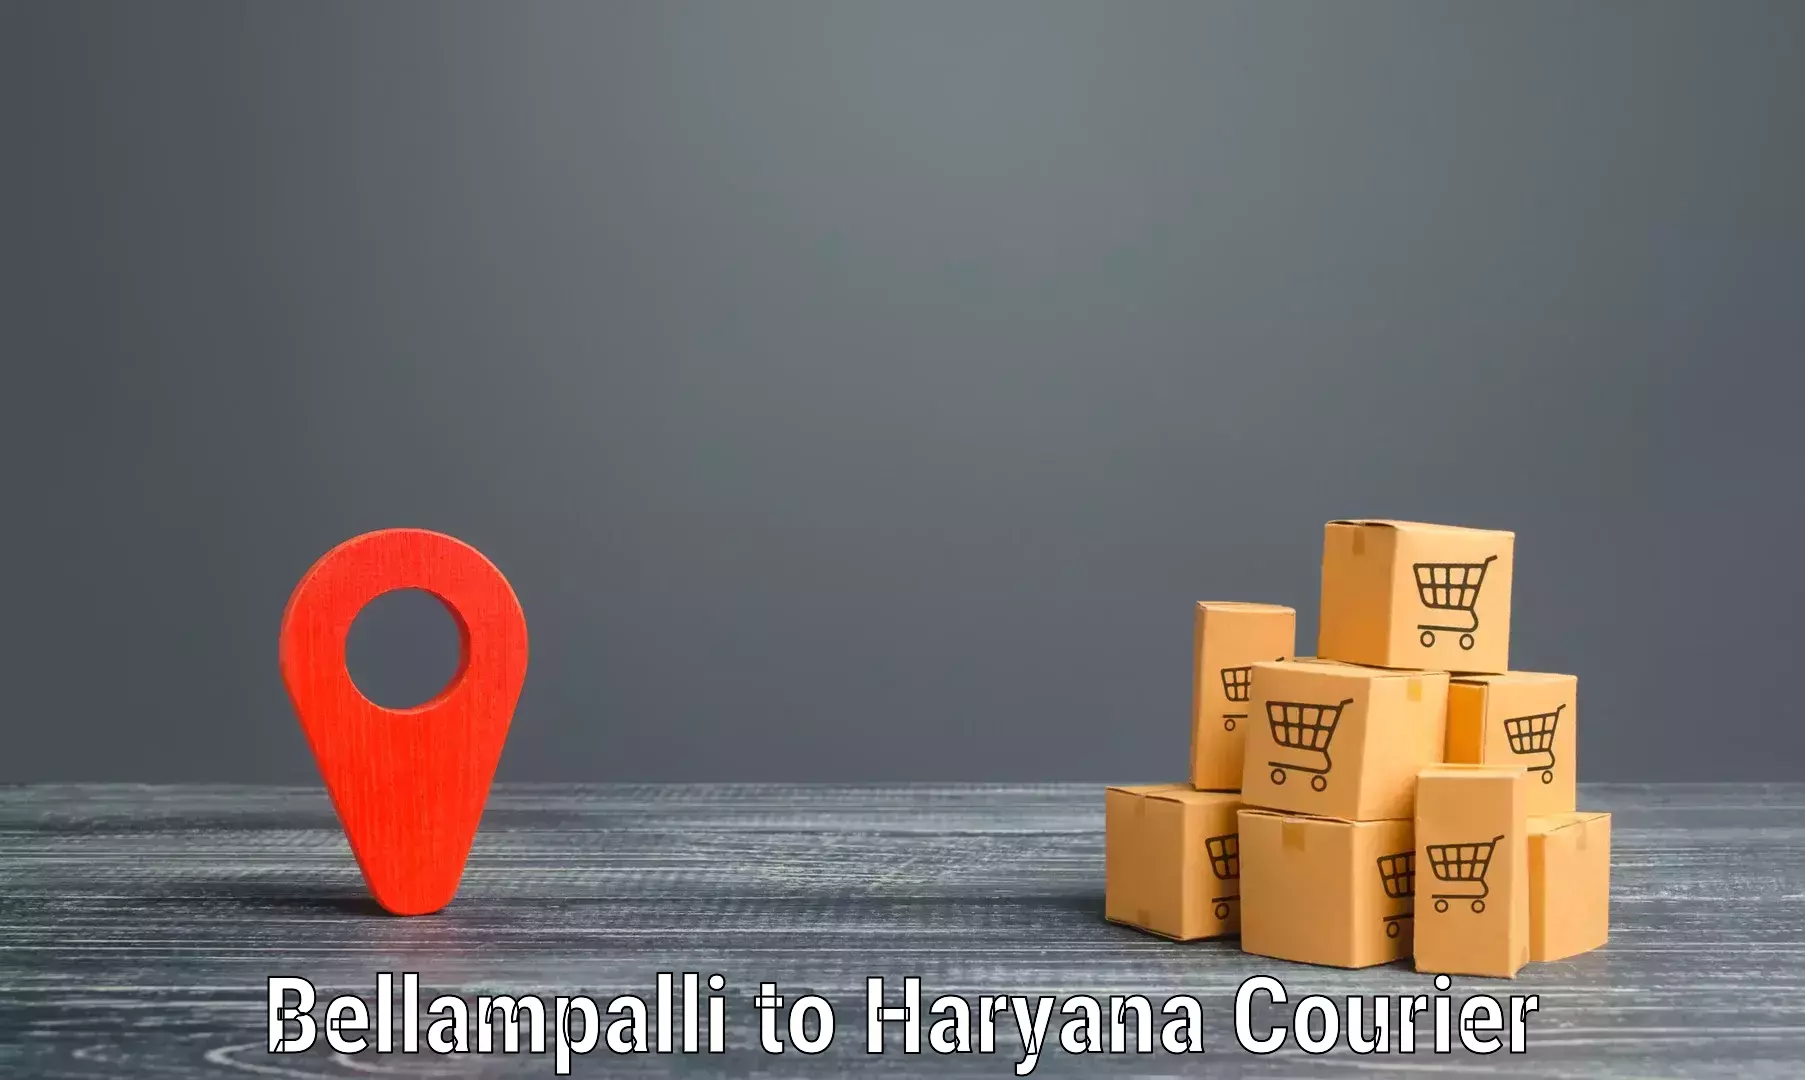 High-speed parcel service Bellampalli to Bahal